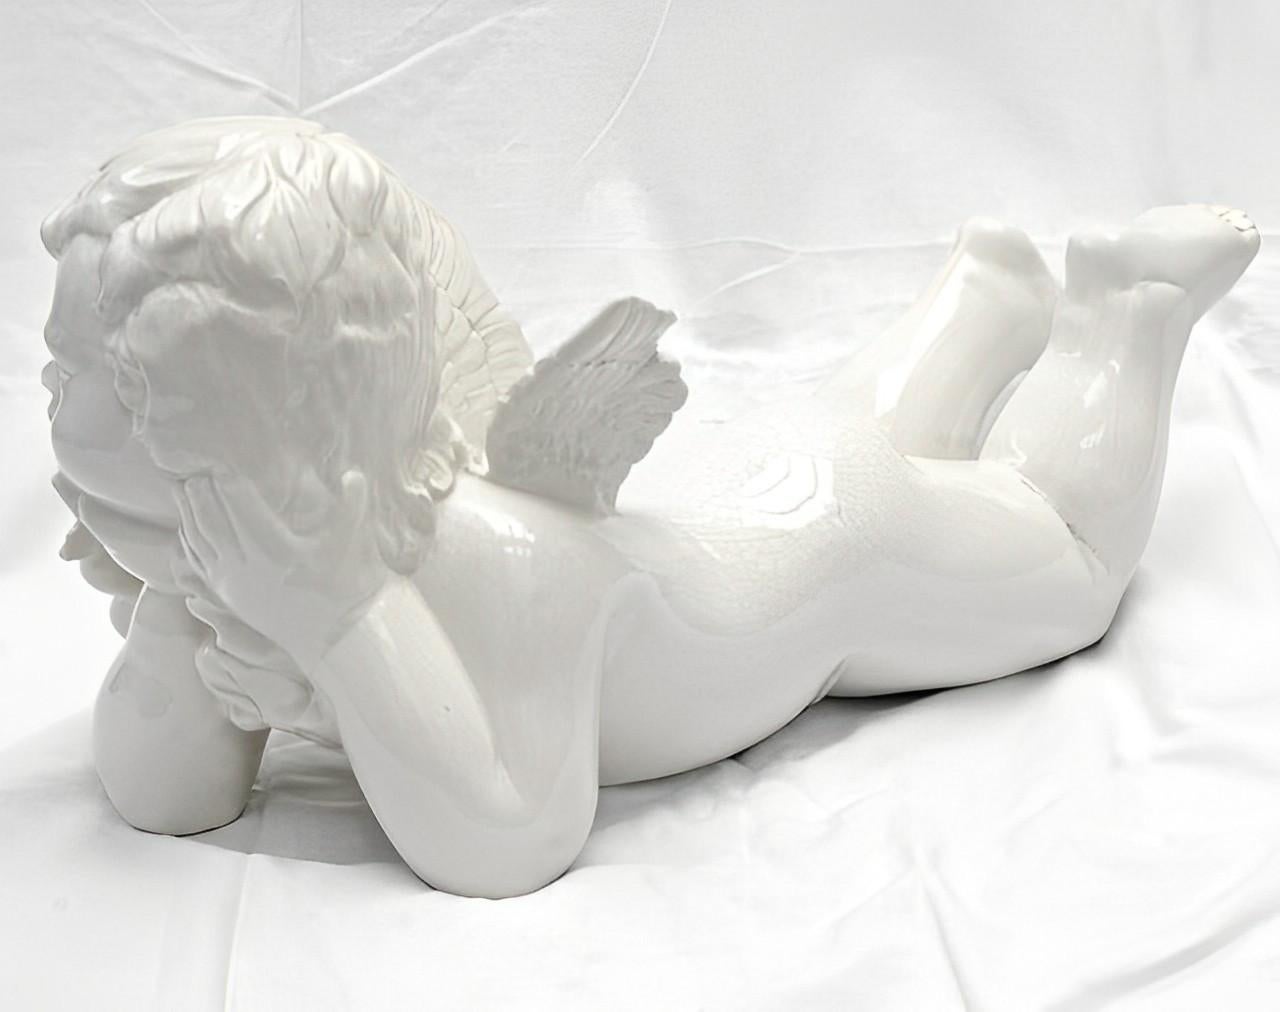 Lovely Vietri large white crackle glazed ceramic cherub figurine. Made in Italy. Measuring length 53cm / 20.86 inches by maximum width 22cm / 8.66 inches, and height 24cm / 9.44 inches. There is a bit of damage to his face, but this is a vintage